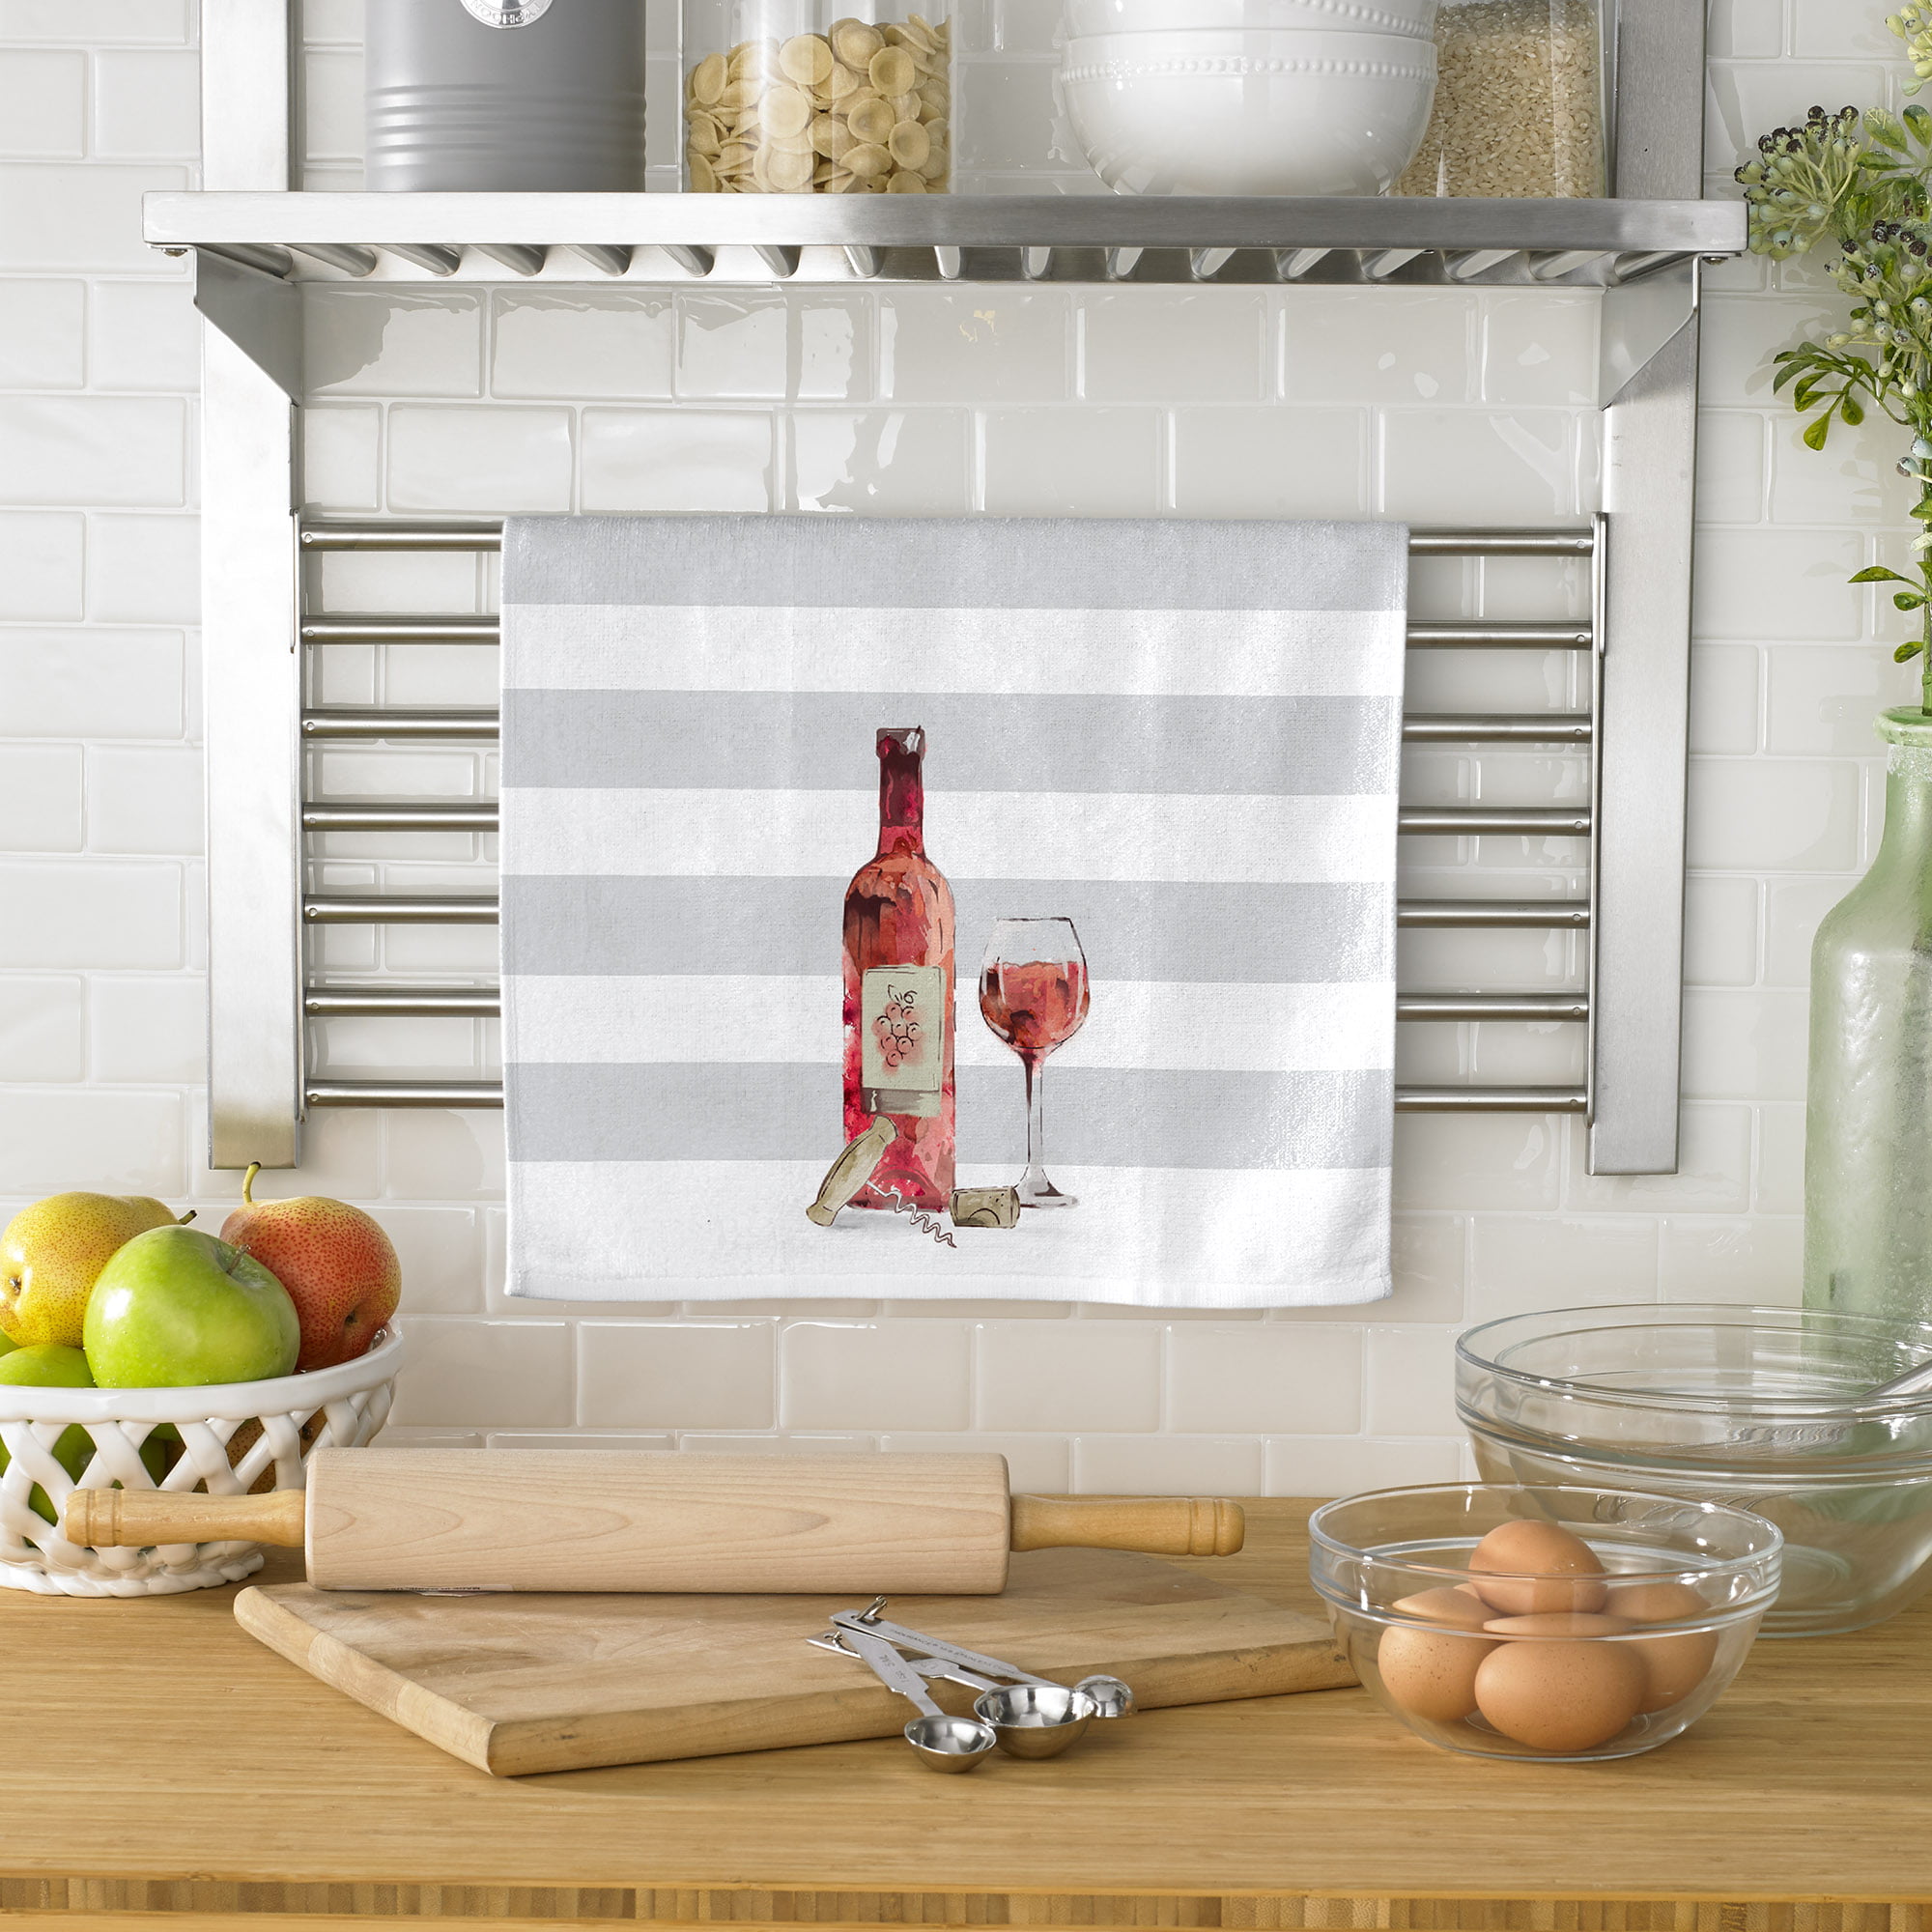 Mainstays 6 Pack Barmop Kitchen Towel White